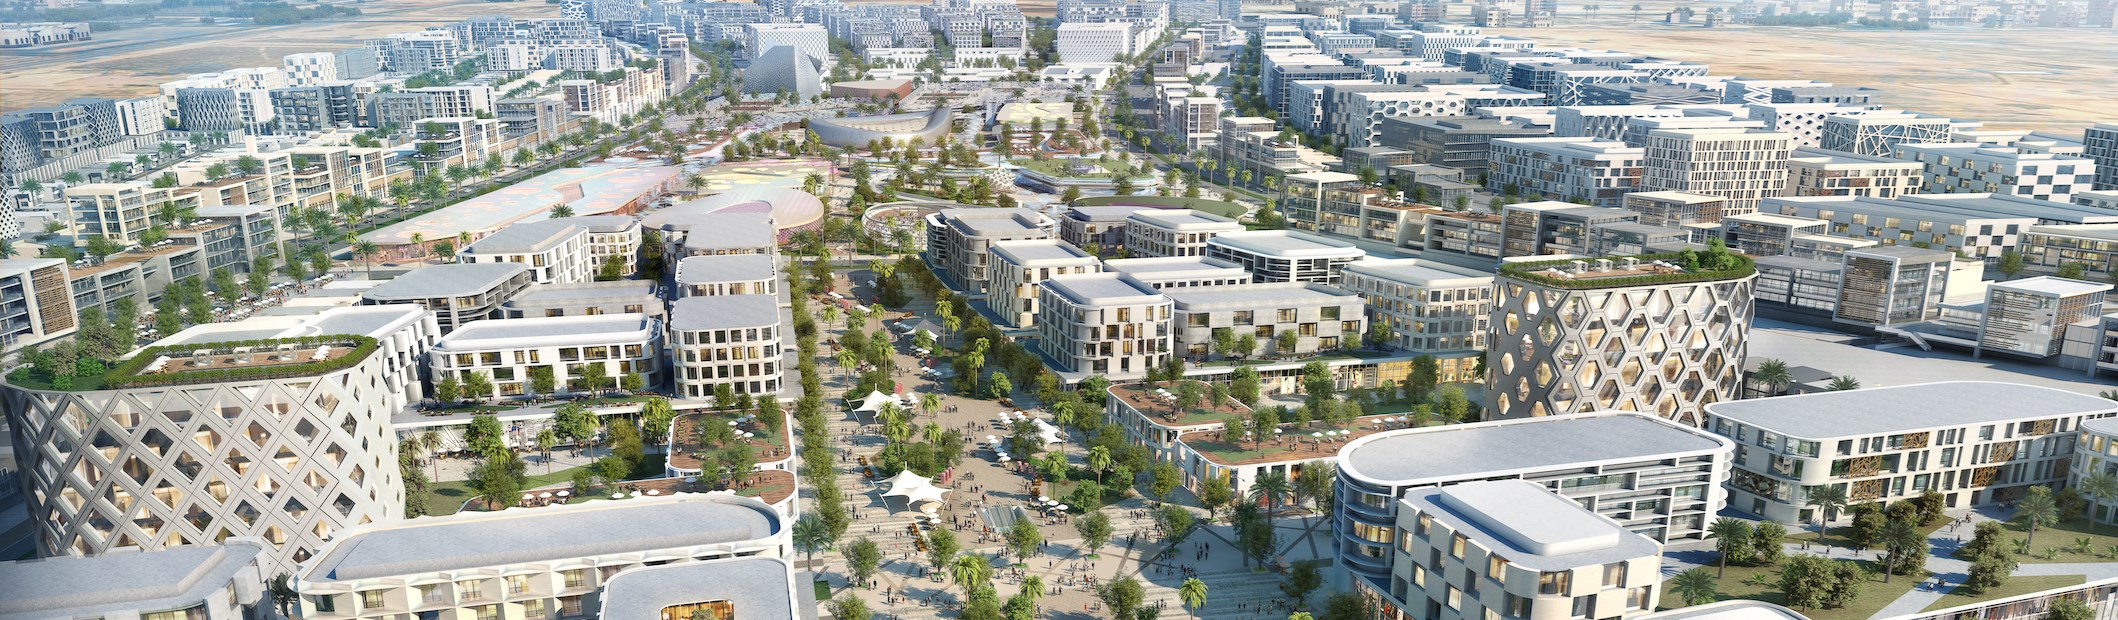 Arada awards first infra contract for Sharjah’s $6.5 billion megaproject